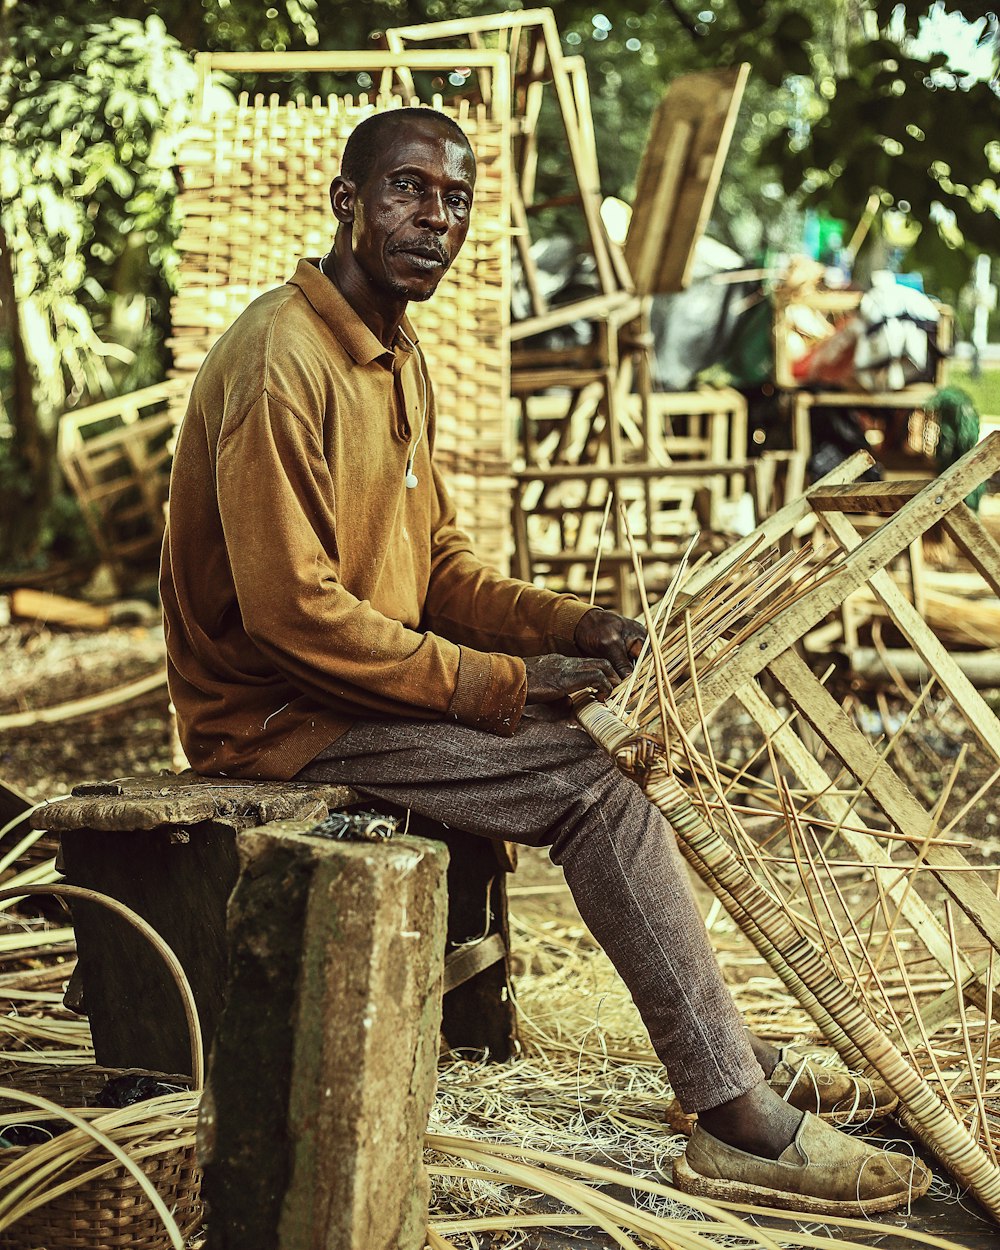 a man sitting on a wooden bench holding a bamboo basket